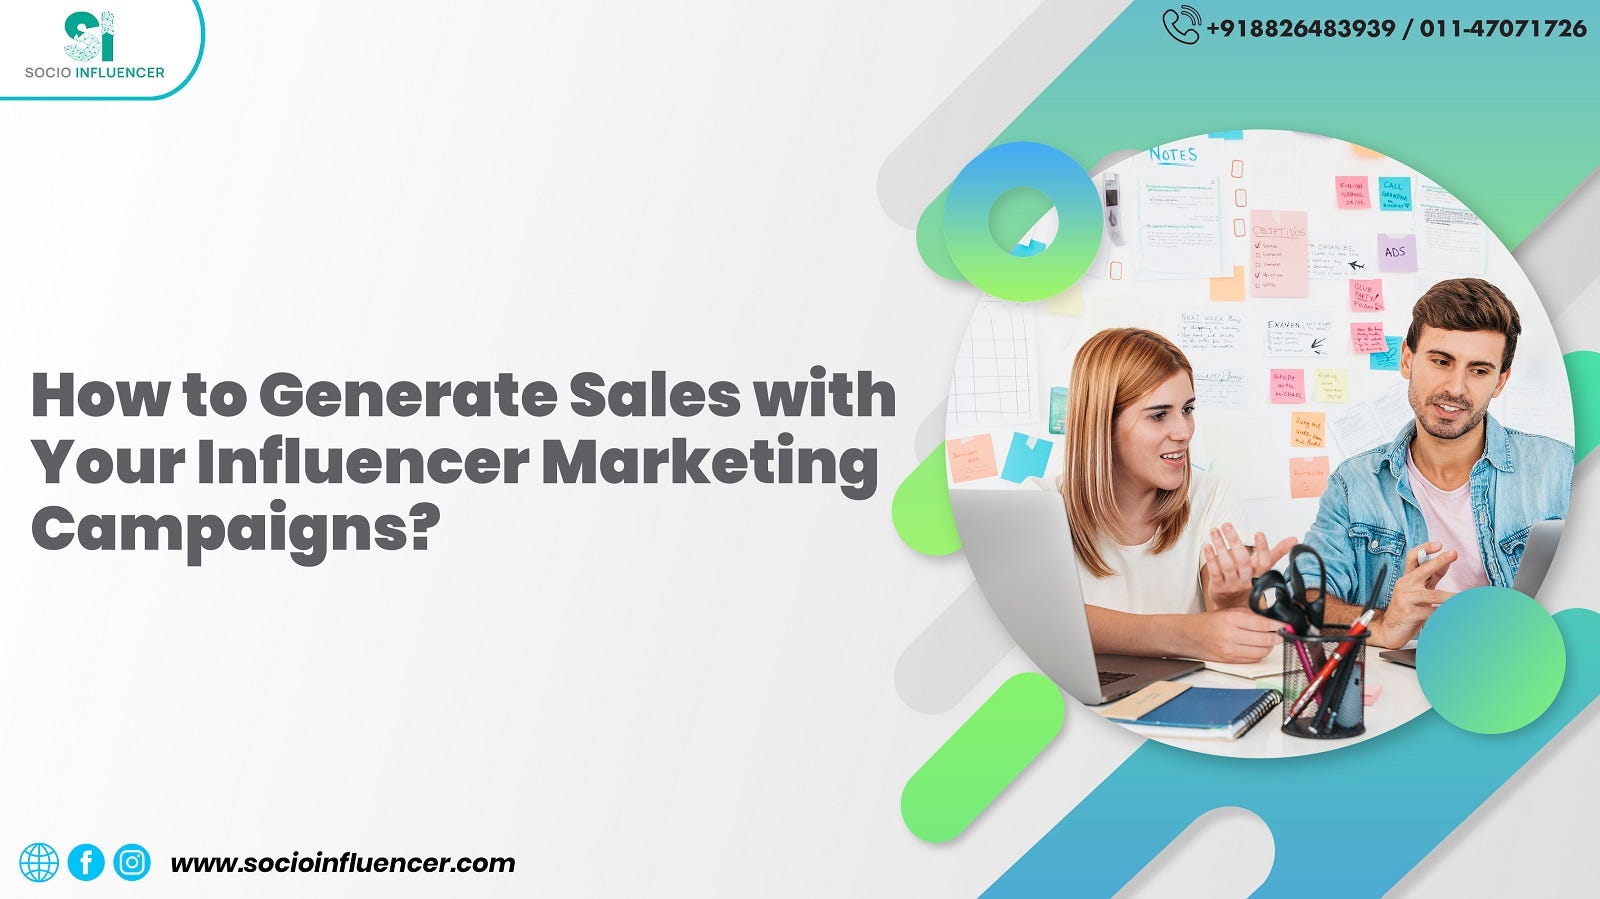 What Are the Best Ways to Use Influencer Marketing to Generate Sales?